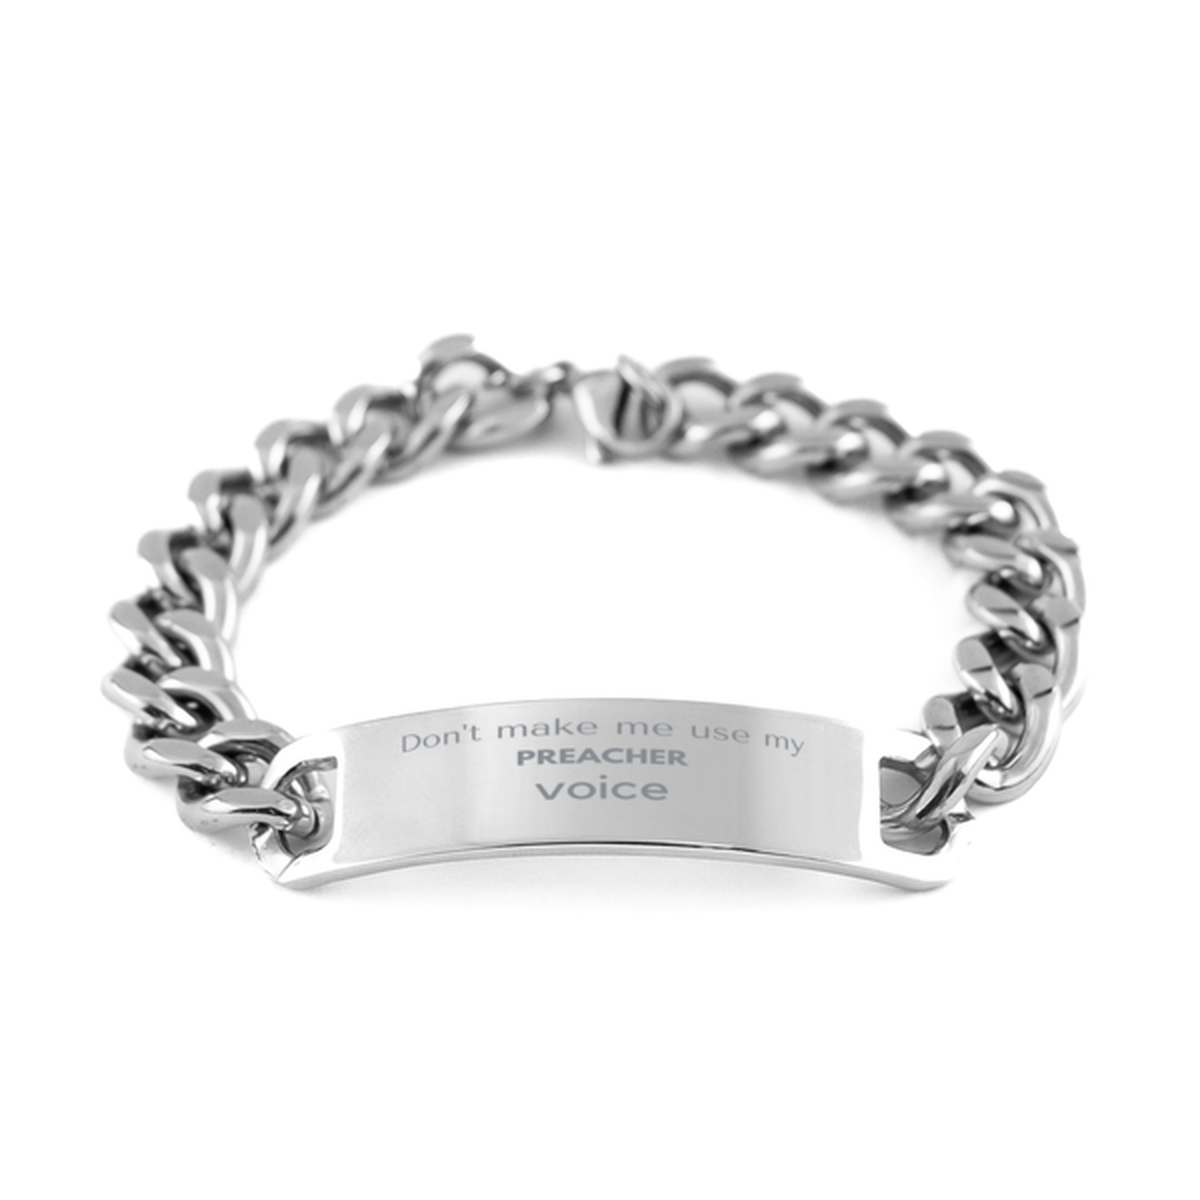 Don't make me use my Preacher voice, Sarcasm Preacher Gifts, Christmas Preacher Cuban Chain Stainless Steel Bracelet Birthday Unique Gifts For Preacher Coworkers, Men, Women, Colleague, Friends